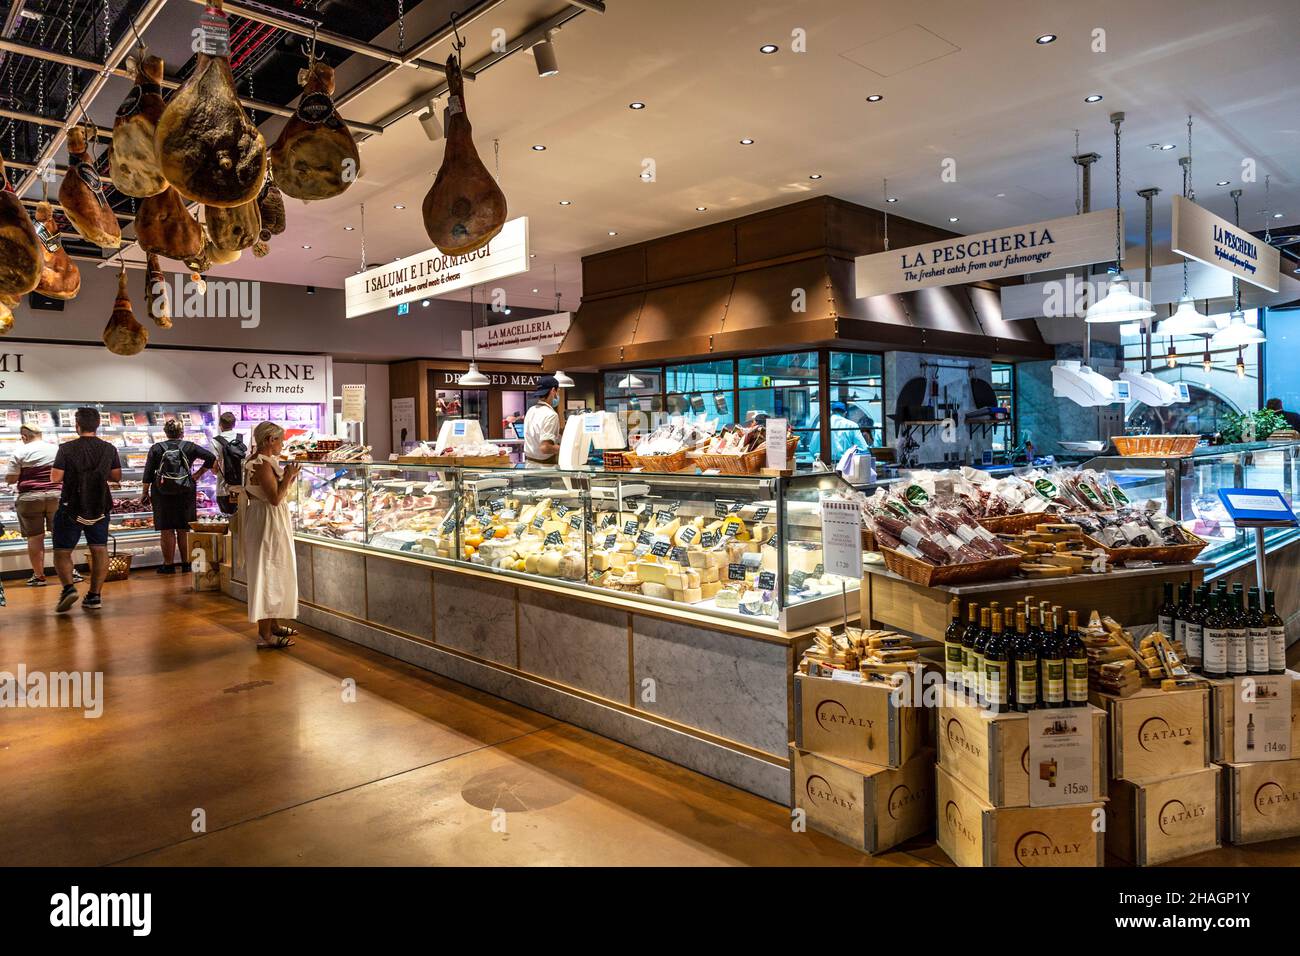 Cured meats and cheese counter at Eataly, London, UK Stock Photo